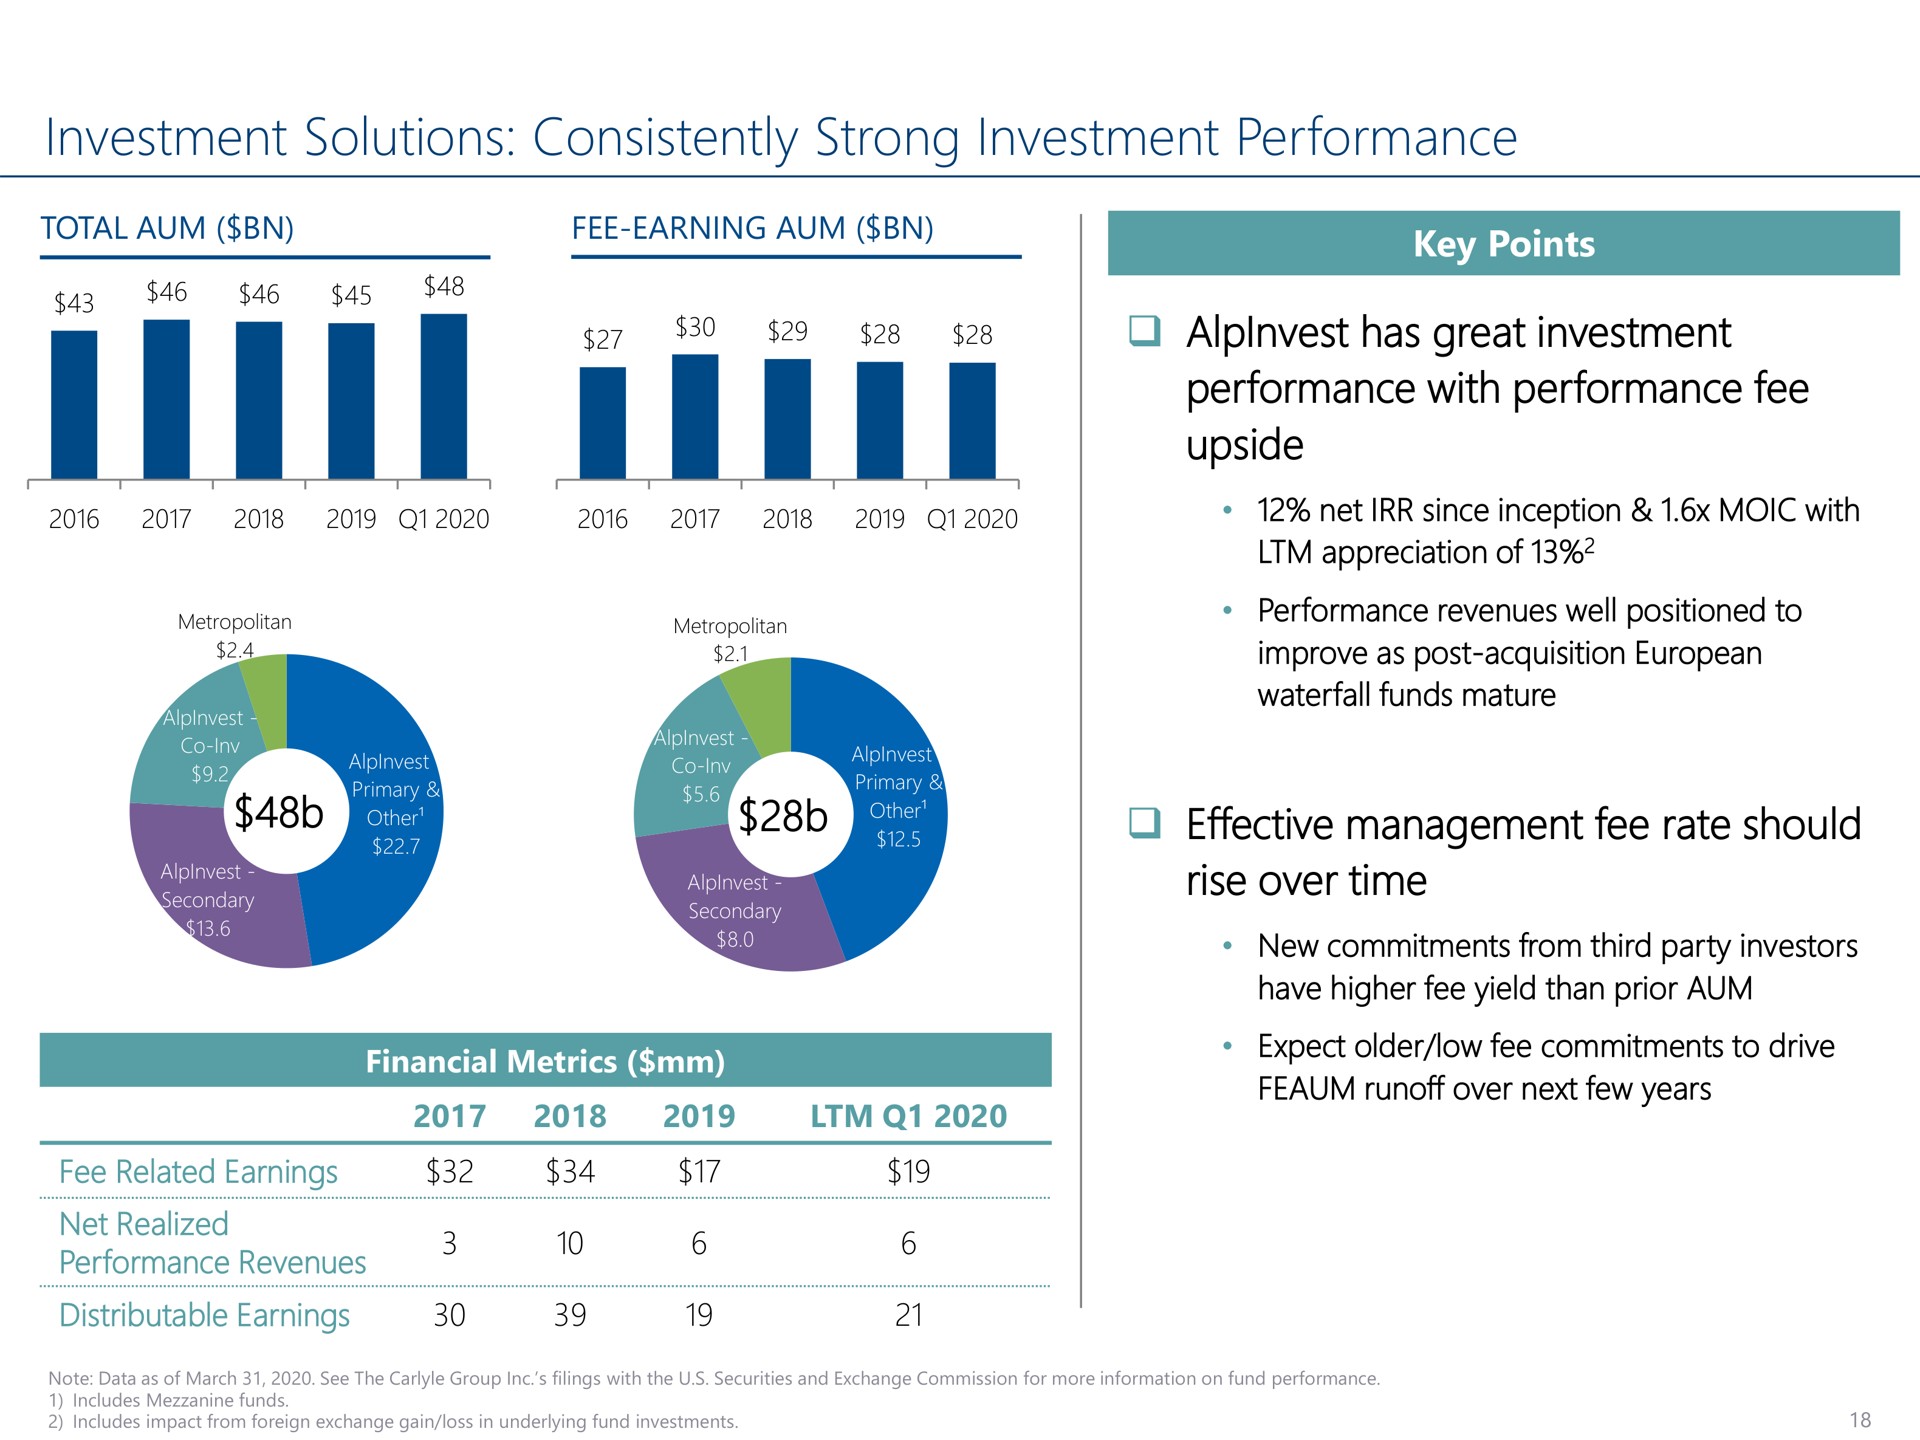 investment solutions consistently strong investment performance has great investment performance with performance fee upside effective management fee rate should rise over time | Carlyle